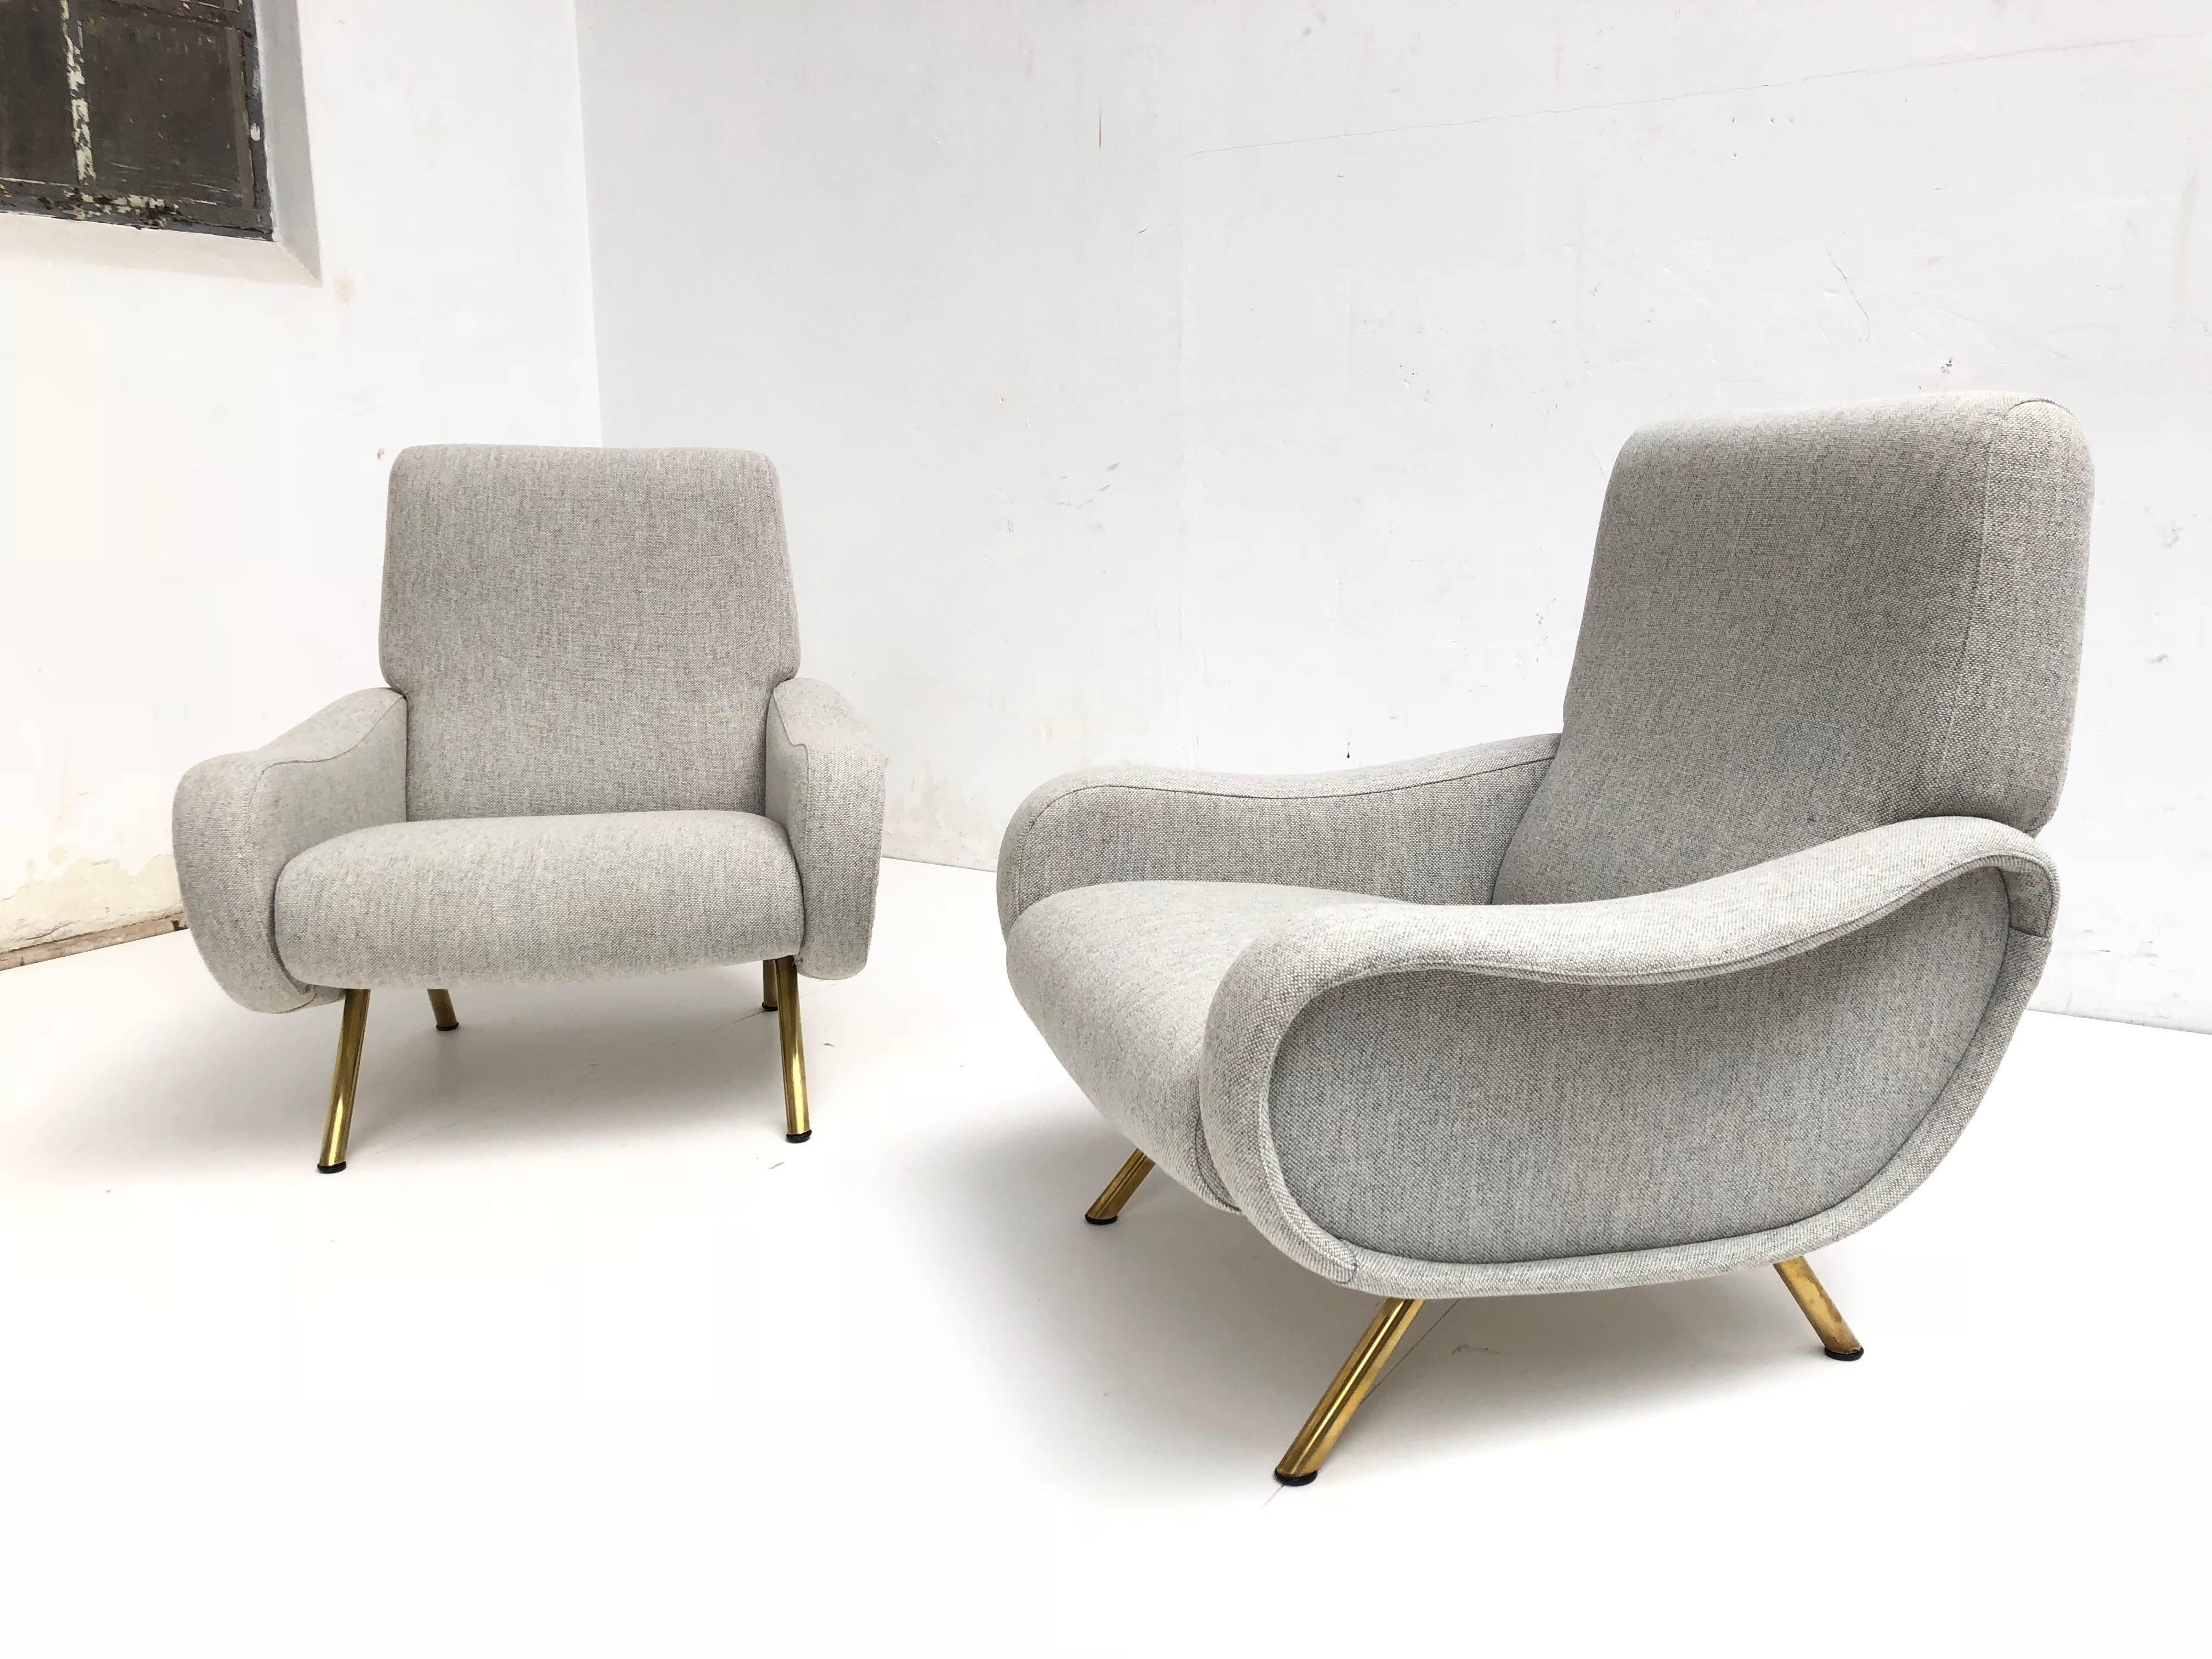 Superb pair of fully restored,  very early production 'wood frame' 'Lady' lounge chairs designed by Italian architect Marco Zanuso for Arflex, Italy in 1951.

 These 'lady' chairs  are very early  examples from the  very first few years of